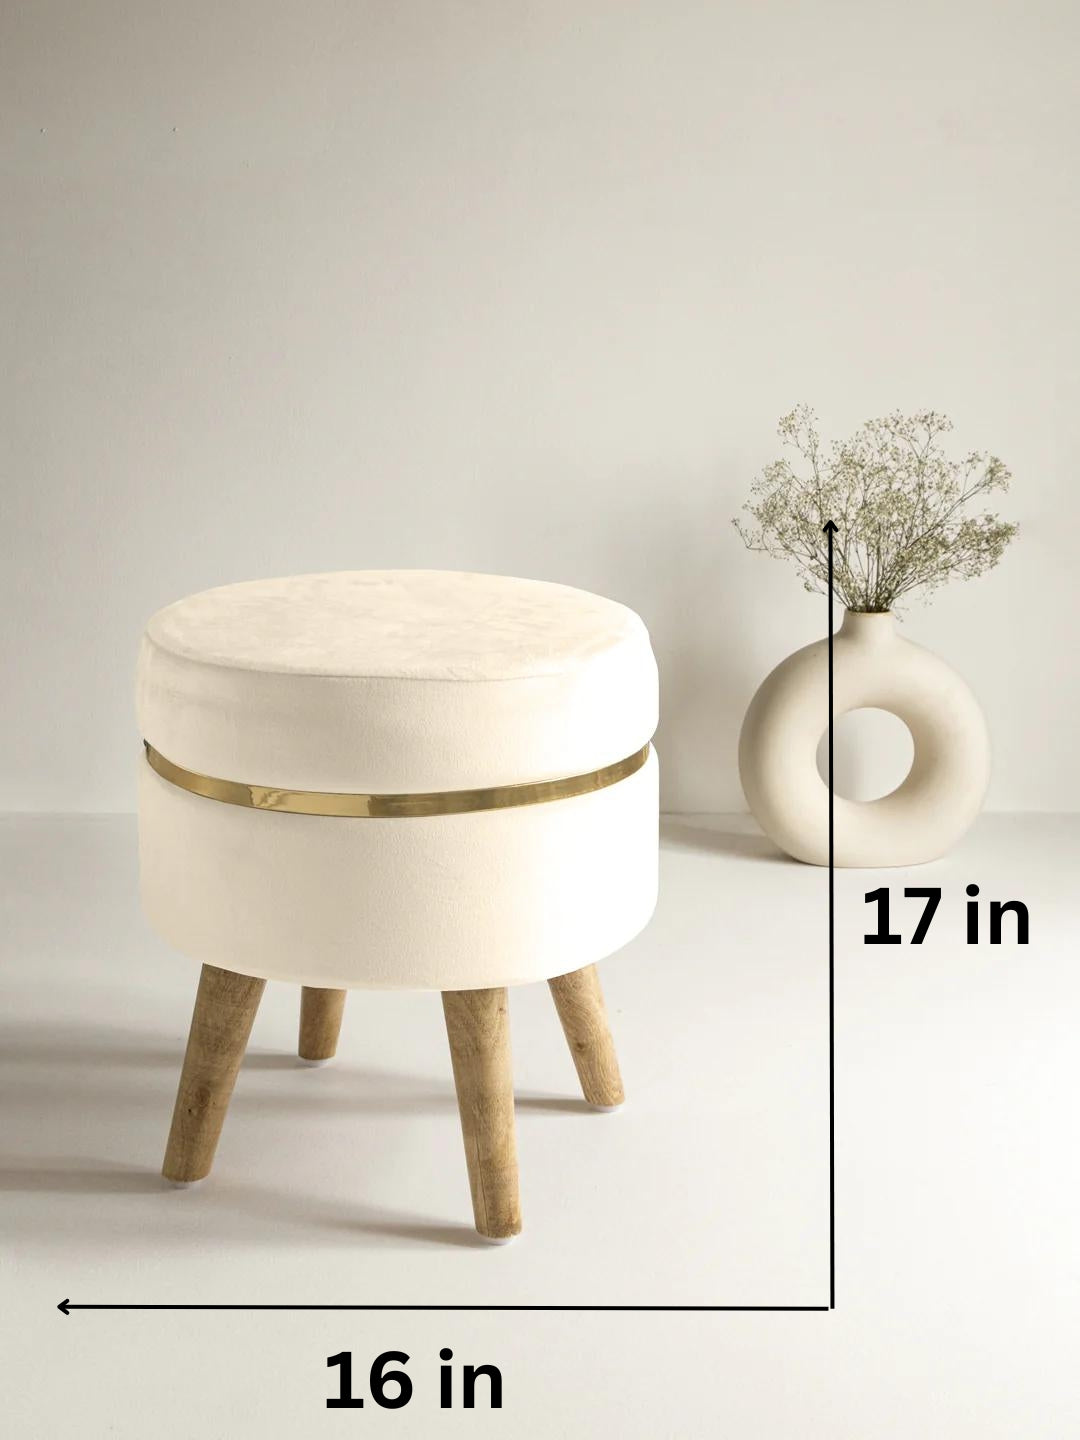 White Stool With Golden Ring & Wood Legs